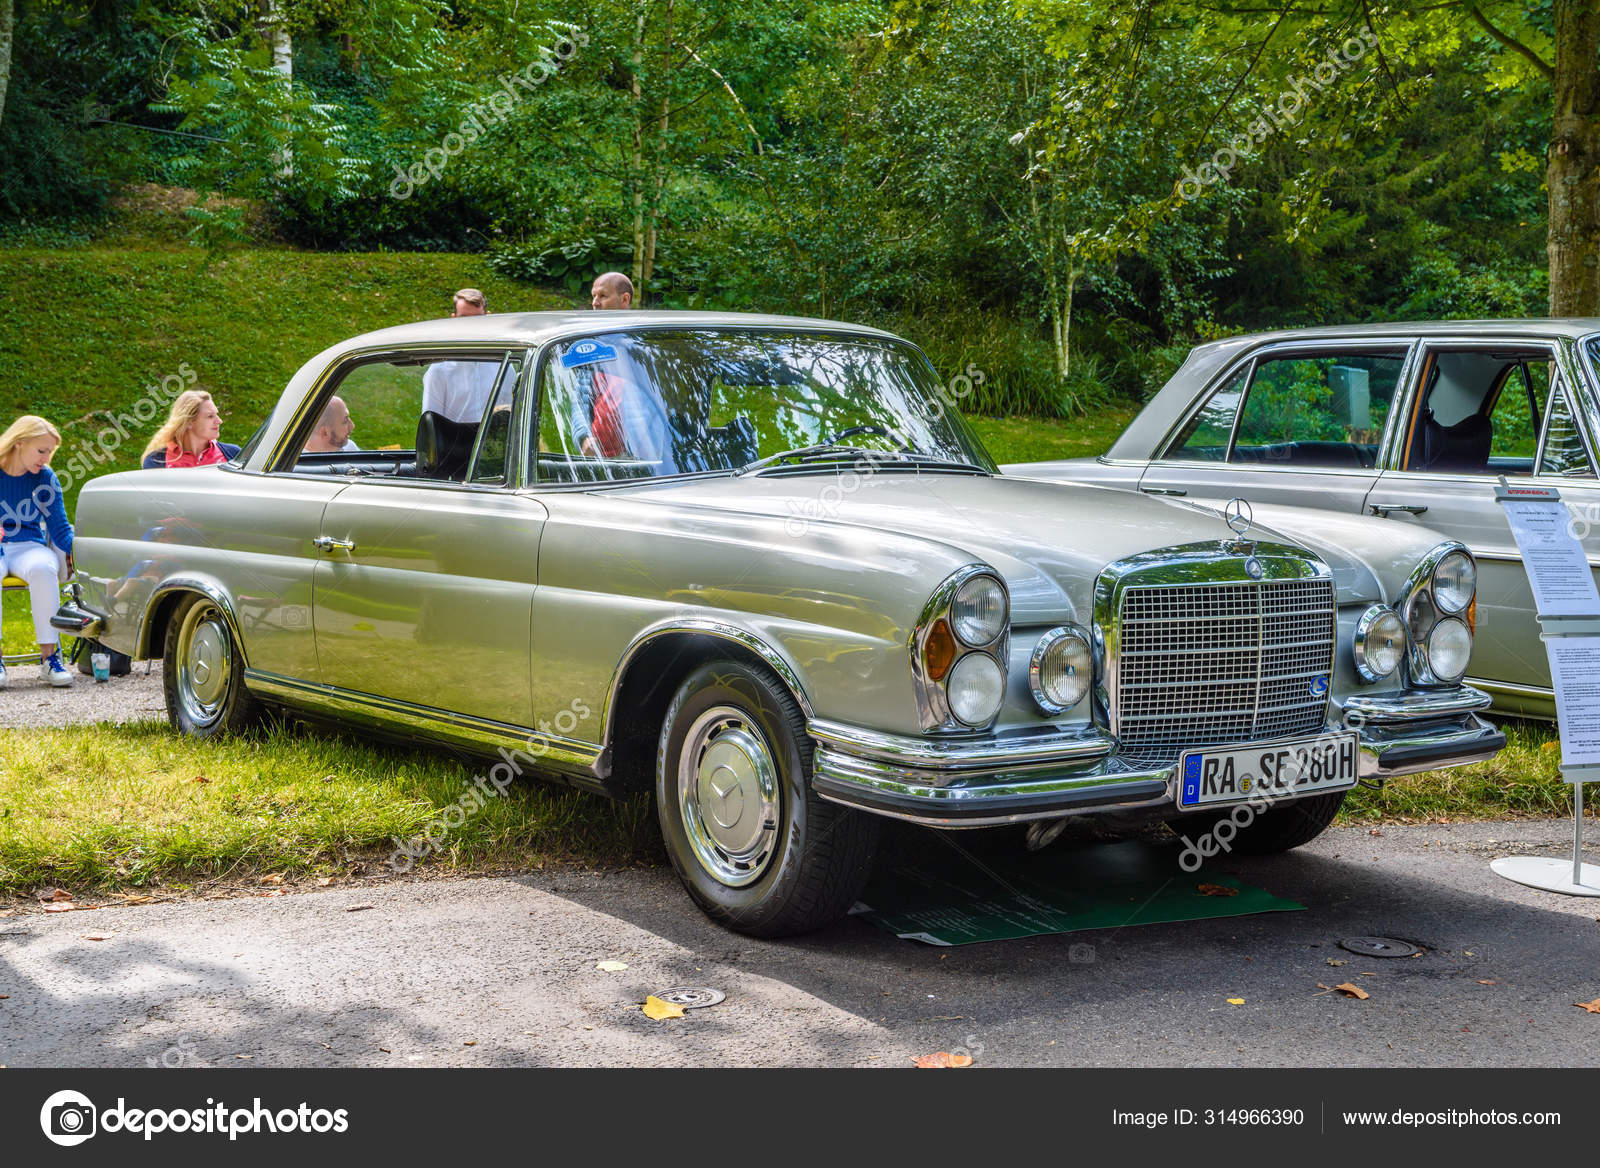 Baden Baden Germany July 19 Silver Gray Mercedes Benz W111 280se 280 Se Coupe 1961 1971 Oldtimer Meeting In Kurpark Stock Editorial Photo C Eagle2308